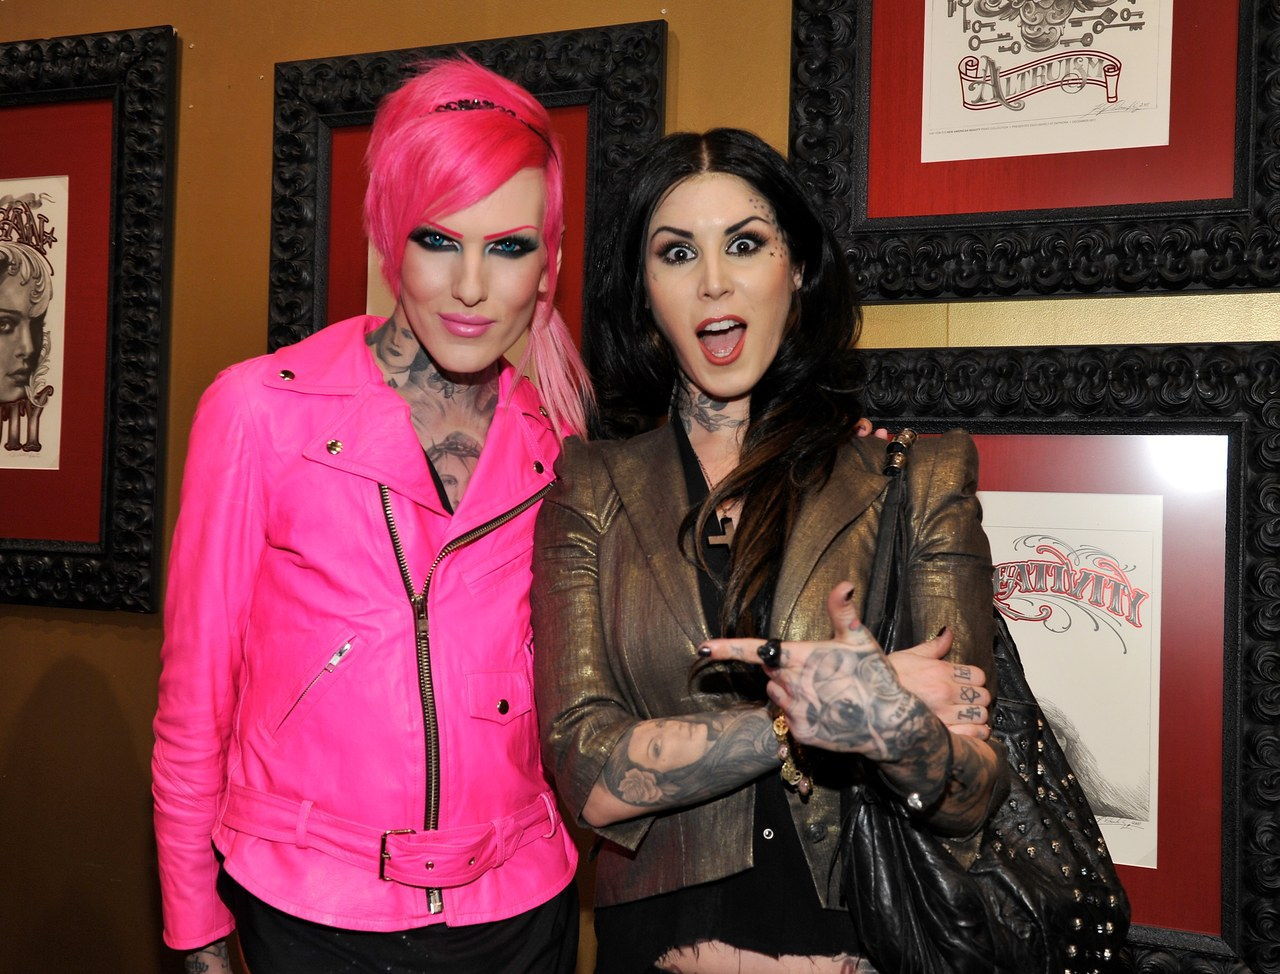 WEST HOLLYWOOD, CA - FEBRUARY 02: Jeffree Star and Kat Von D attends Sephora's VIP preview party for Kat Von D's New American Beauty art show at Wonderland Gallery on February 2, 2012 in West Hollywood, California. (Photo by John Sciulli/Getty Images For Sephora)